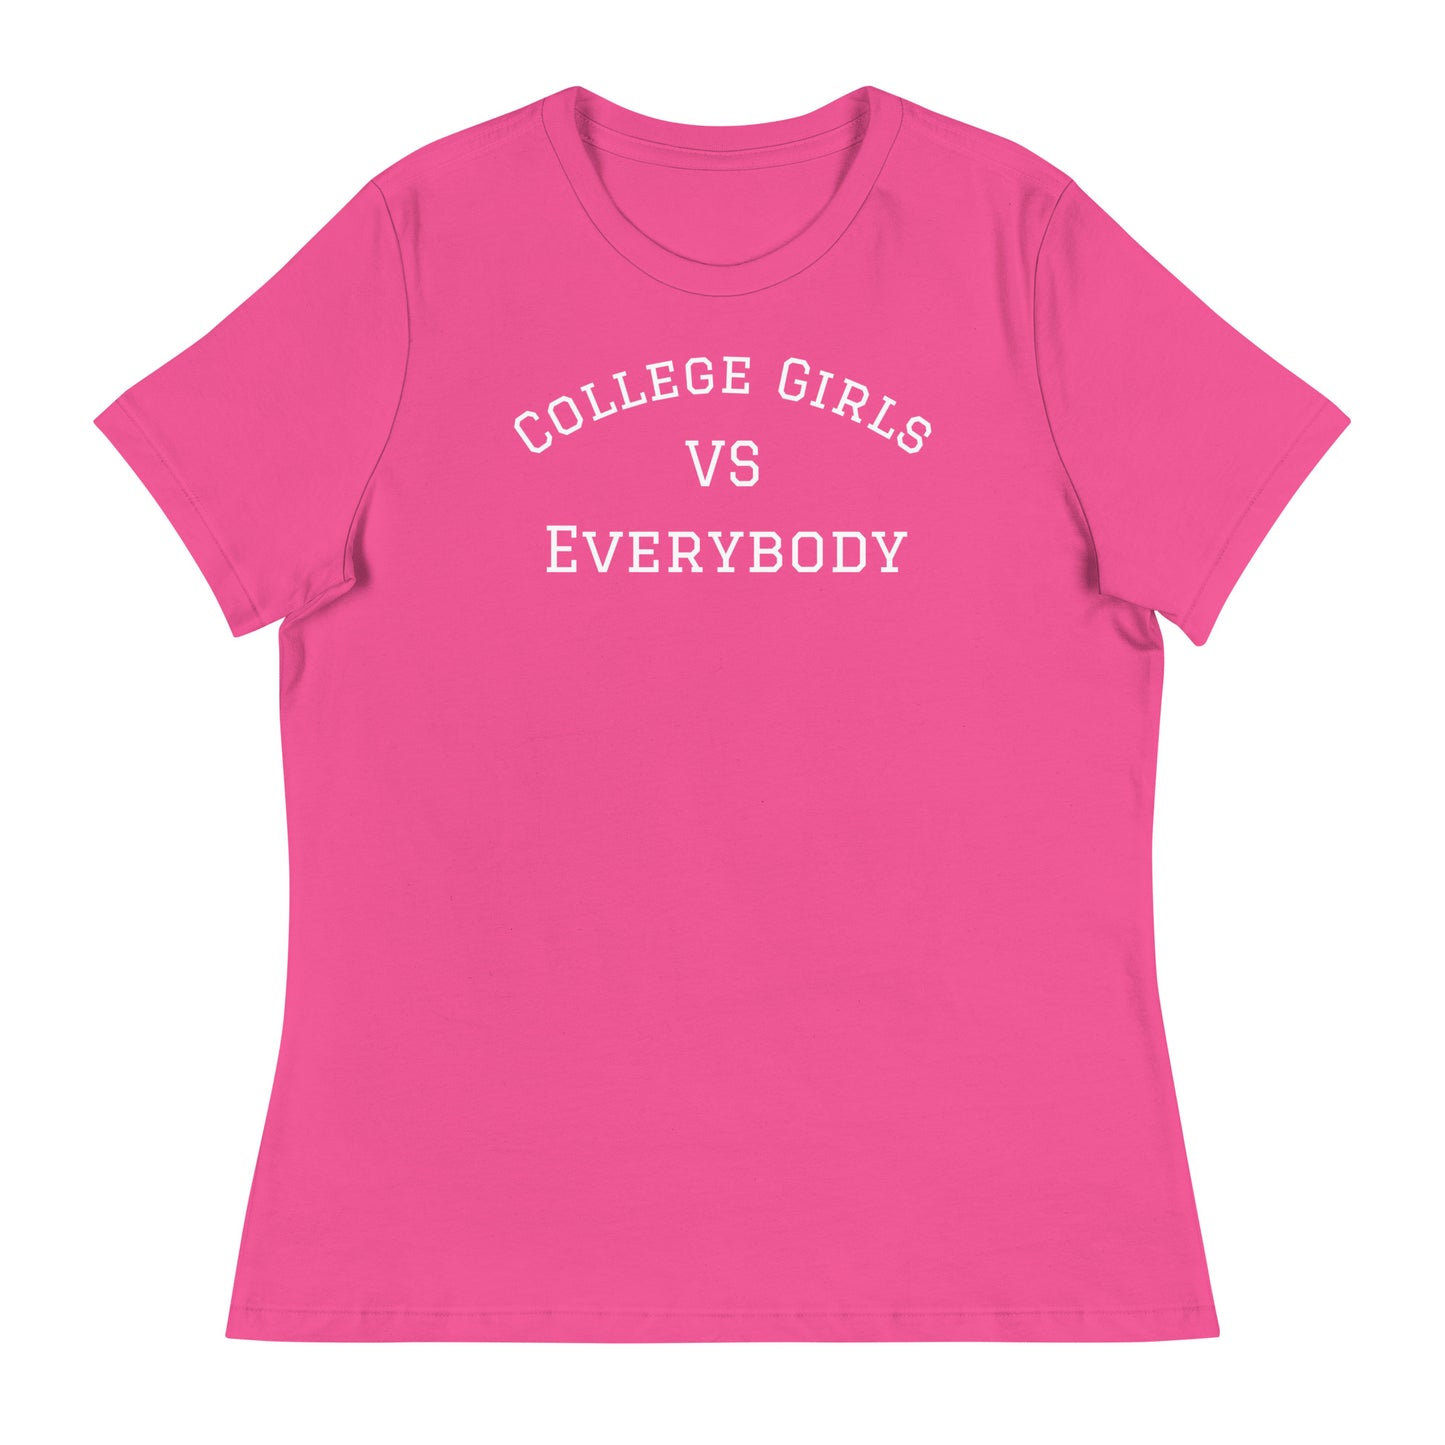 Best women's short sleeve college-casual stylish berry tee shirt that celebrates college girls